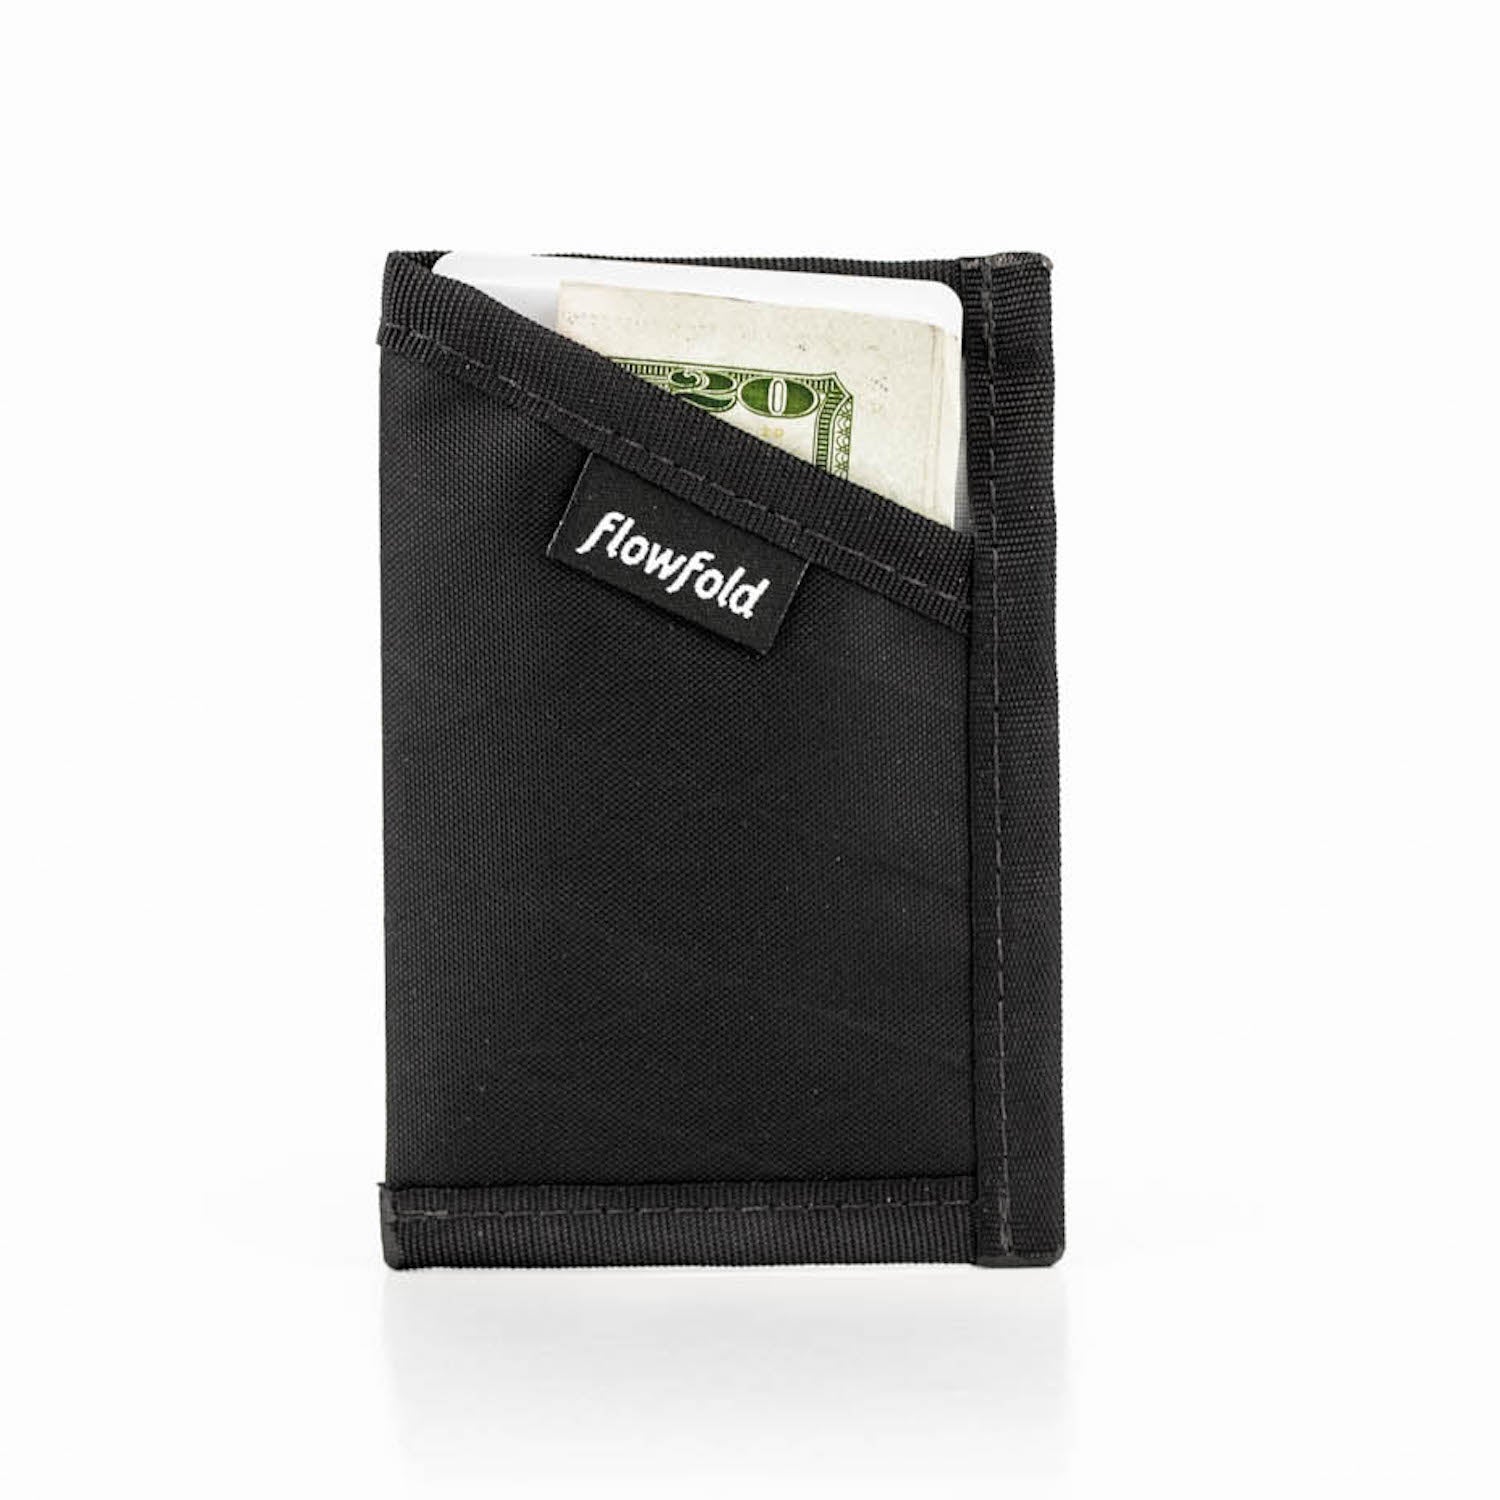 Outline' Wallet - Handmade Leather Wallet (Navy)